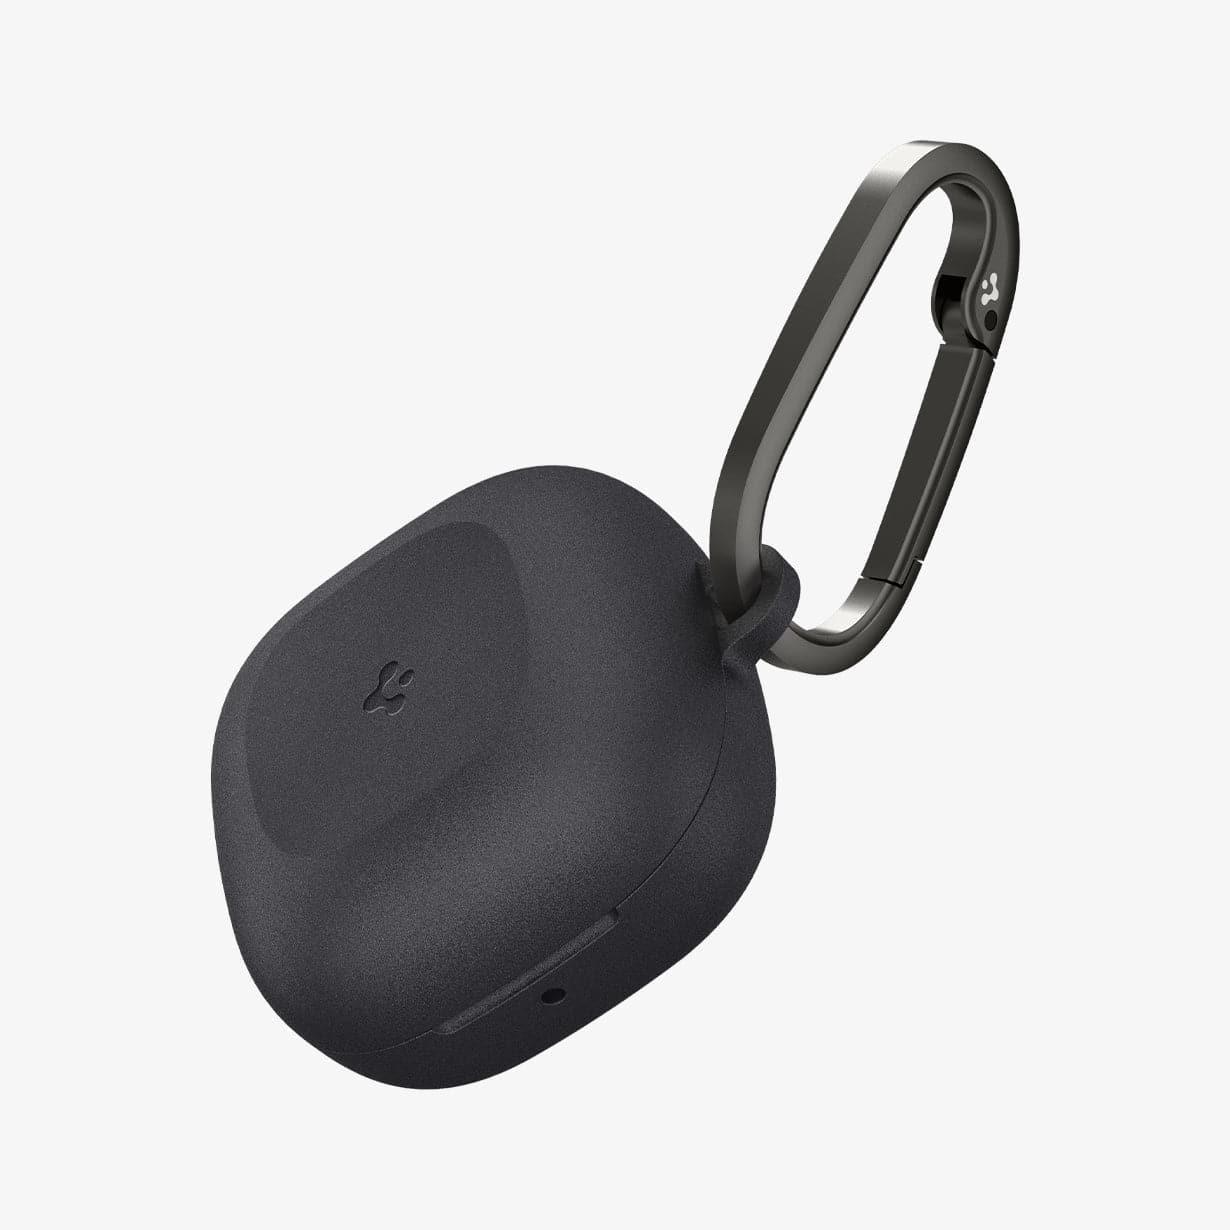 ACS03166 - Galaxy Buds 2 Pro / 2 / Pro / Live Case GeoFit in graphite gray showing the top, front and carabiner